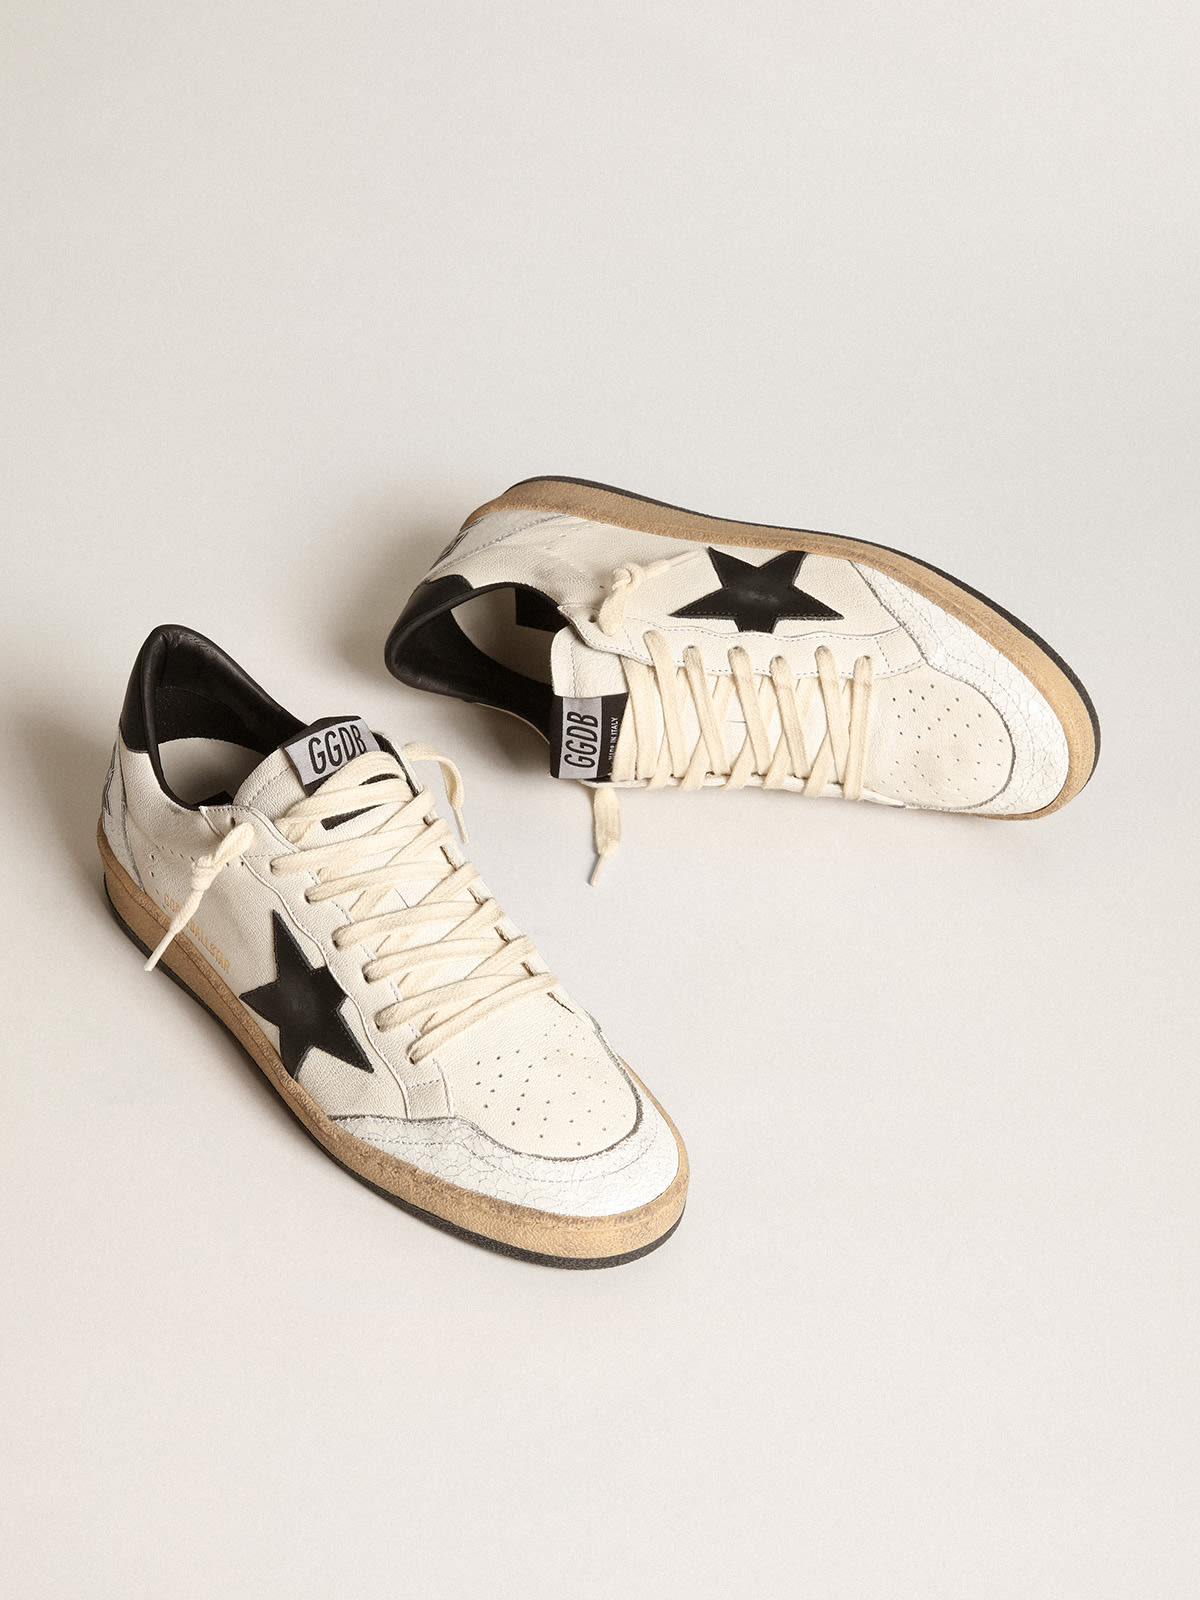 Golden Goose - Women's Ball Star sneakers in white nappa leather with black leather star and heel tab in 